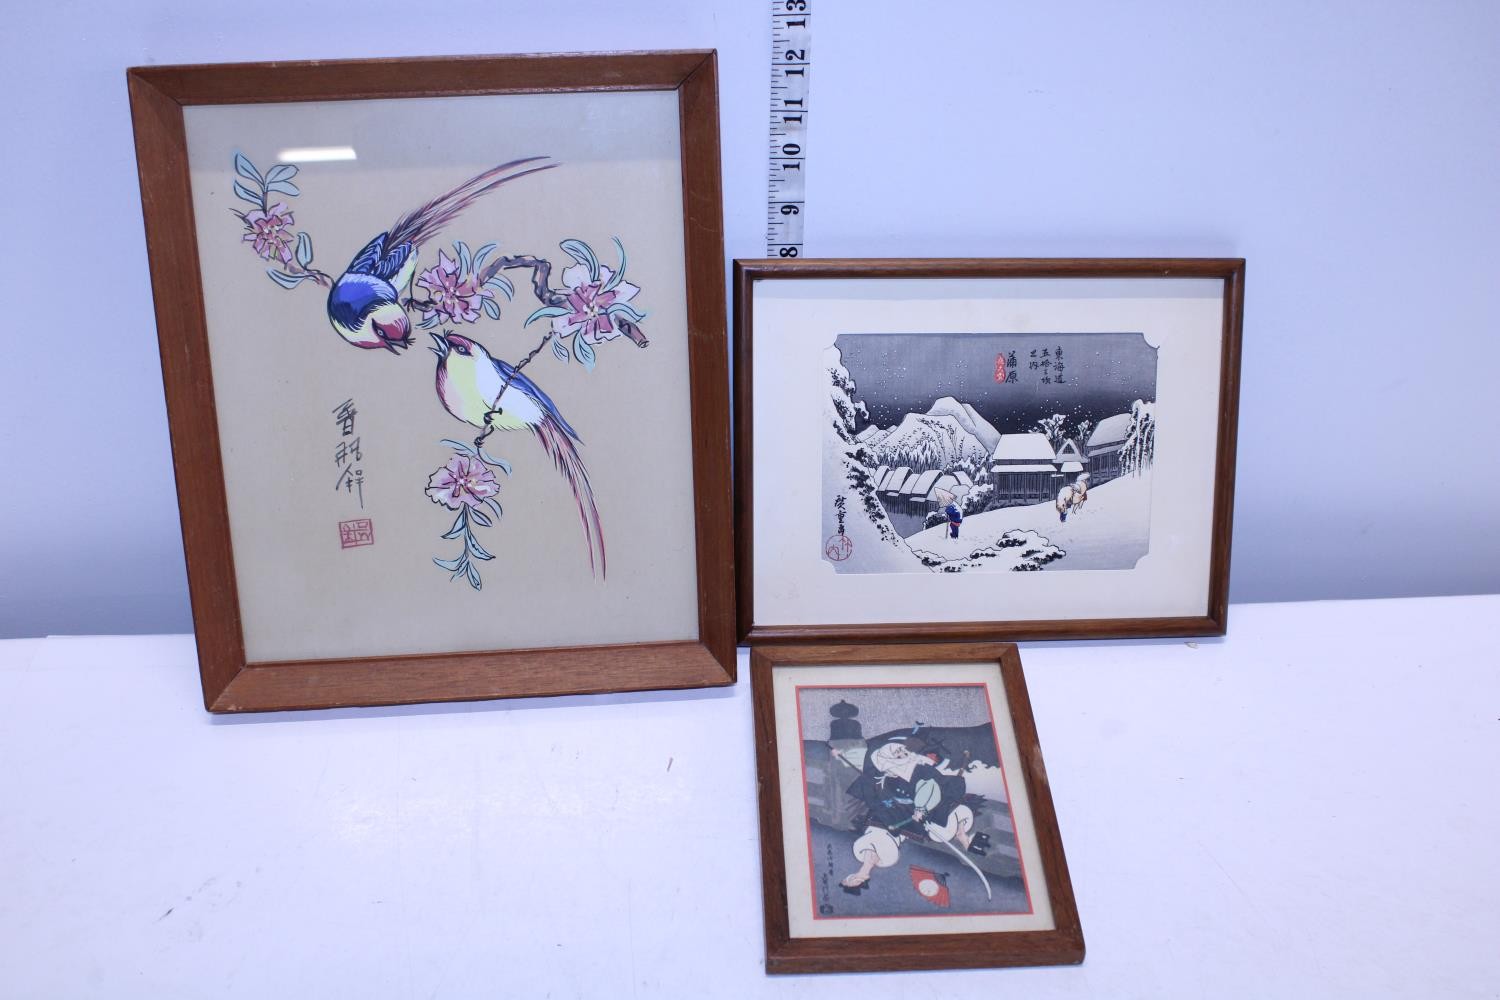 Three framed oriental pictures